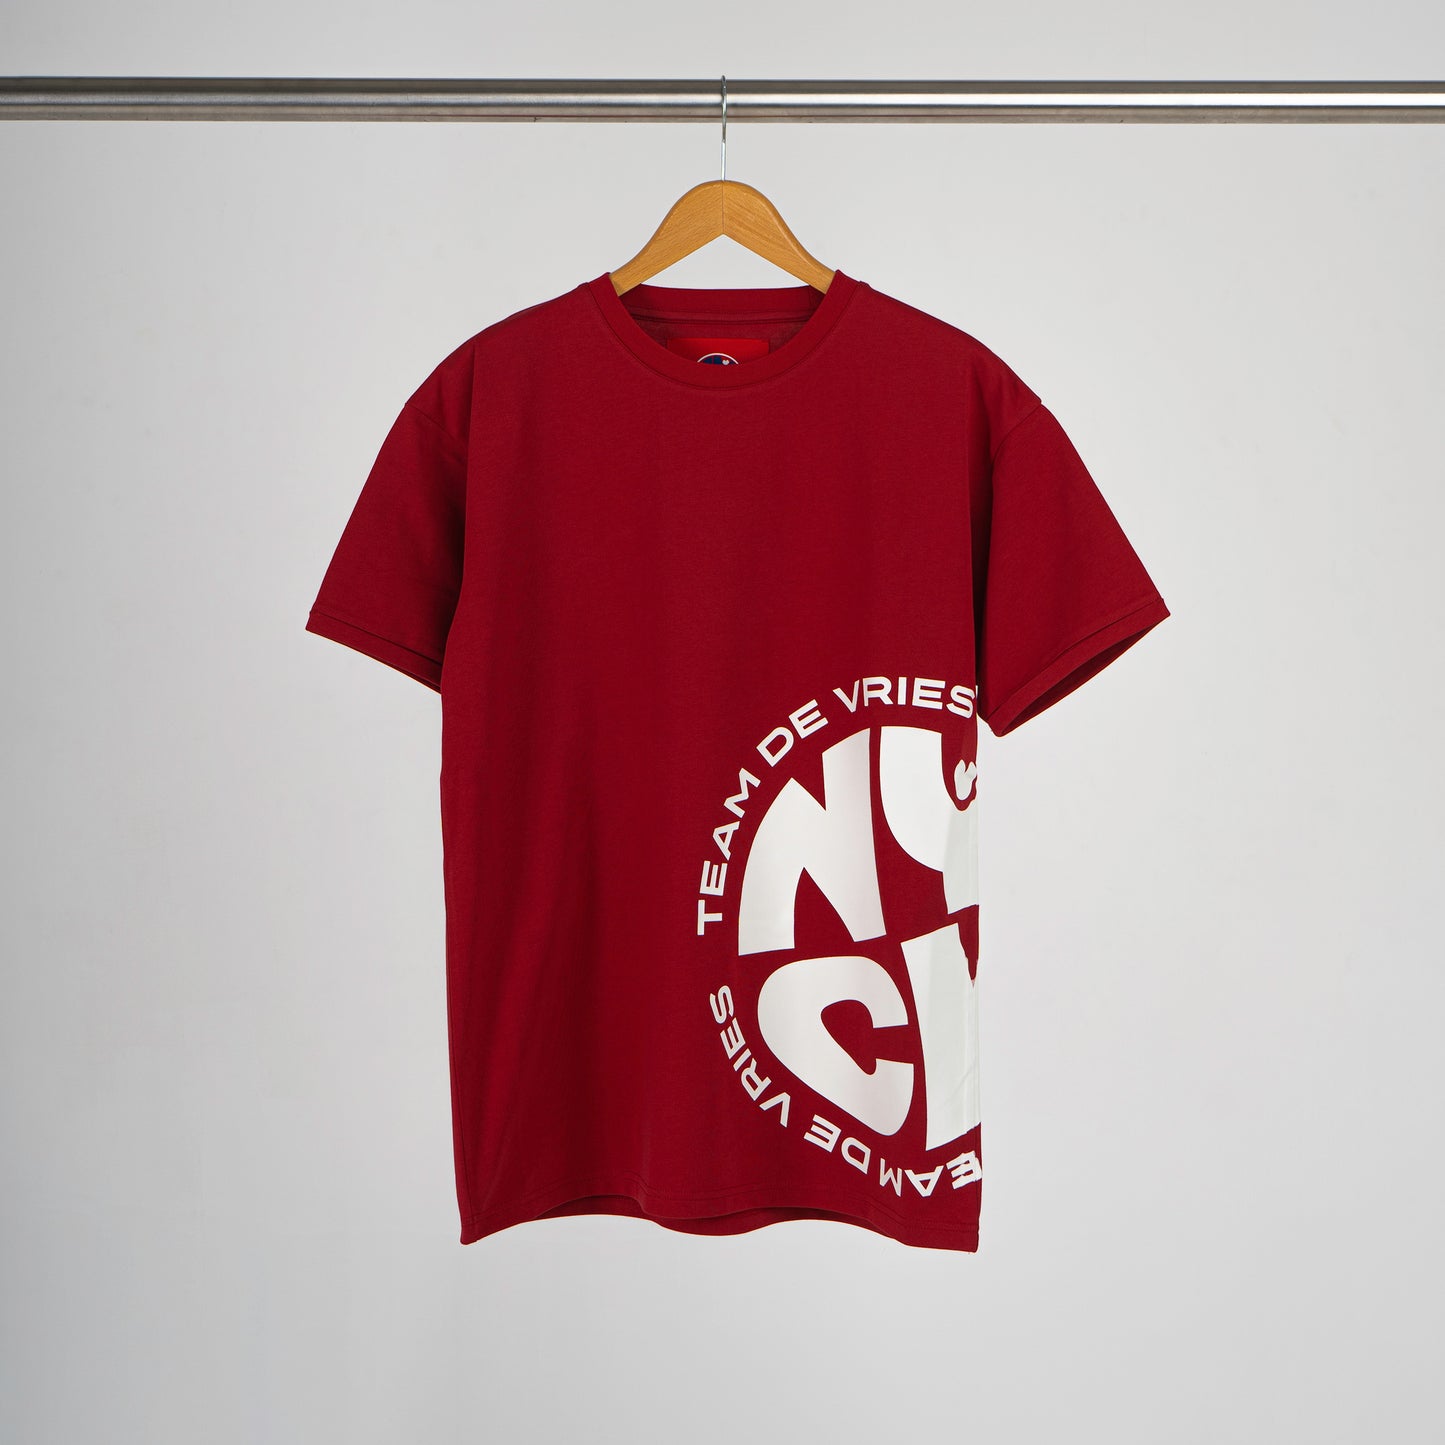 The official NYCK red t-shirt